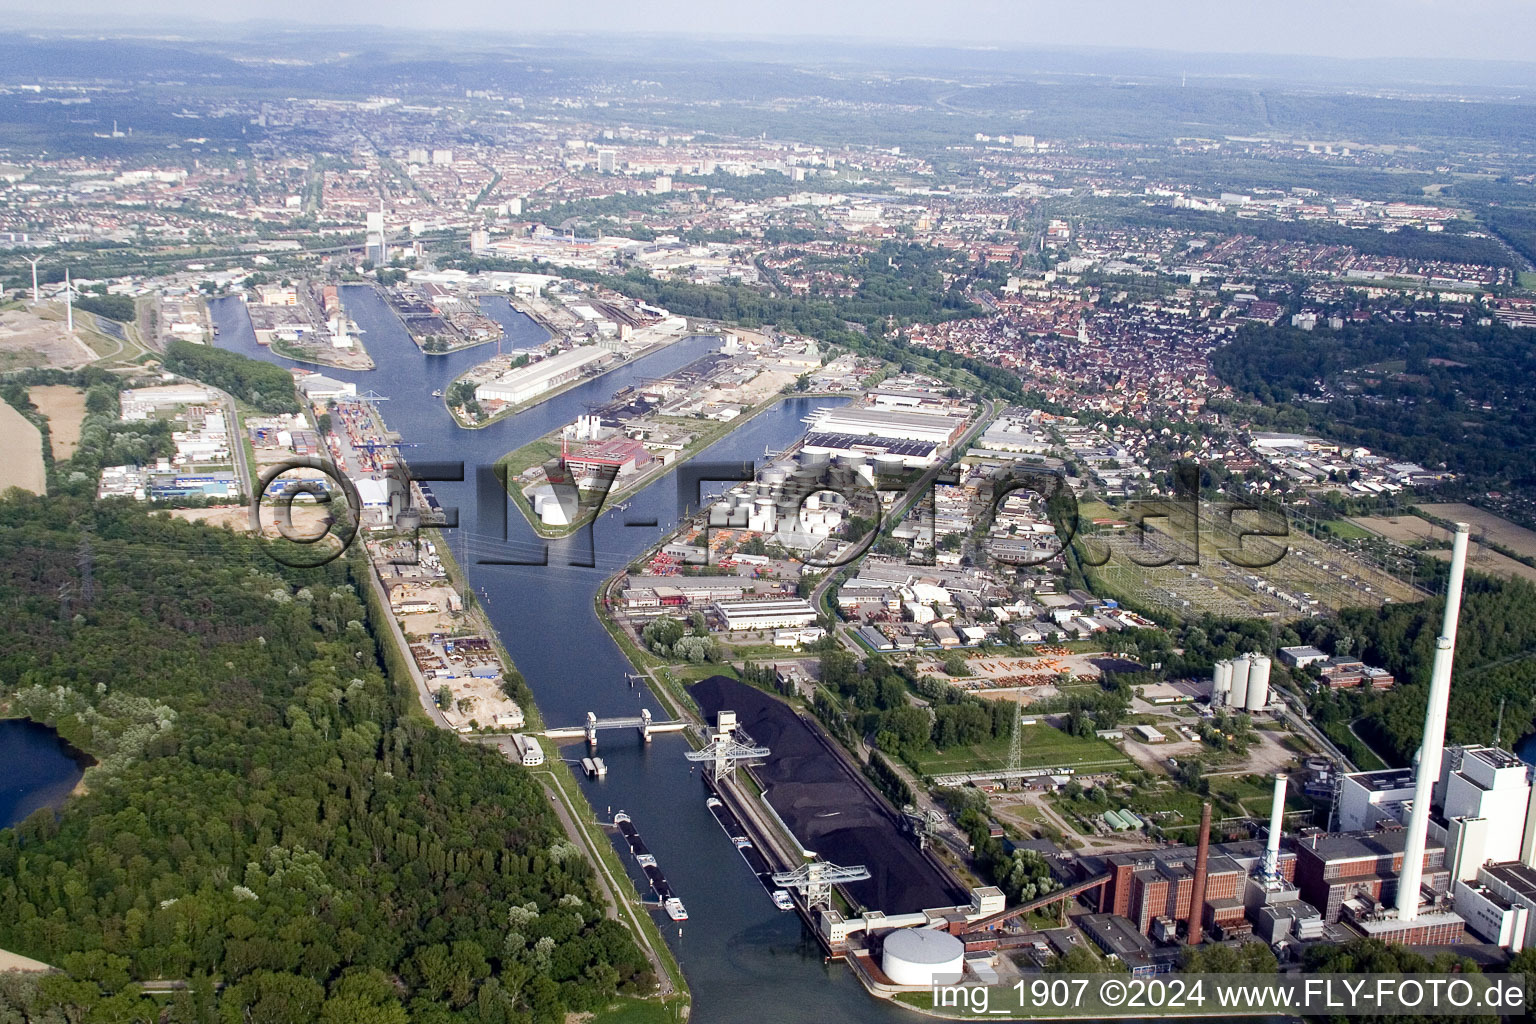 District Rheinhafen in Karlsruhe in the state Baden-Wuerttemberg, Germany seen from a drone